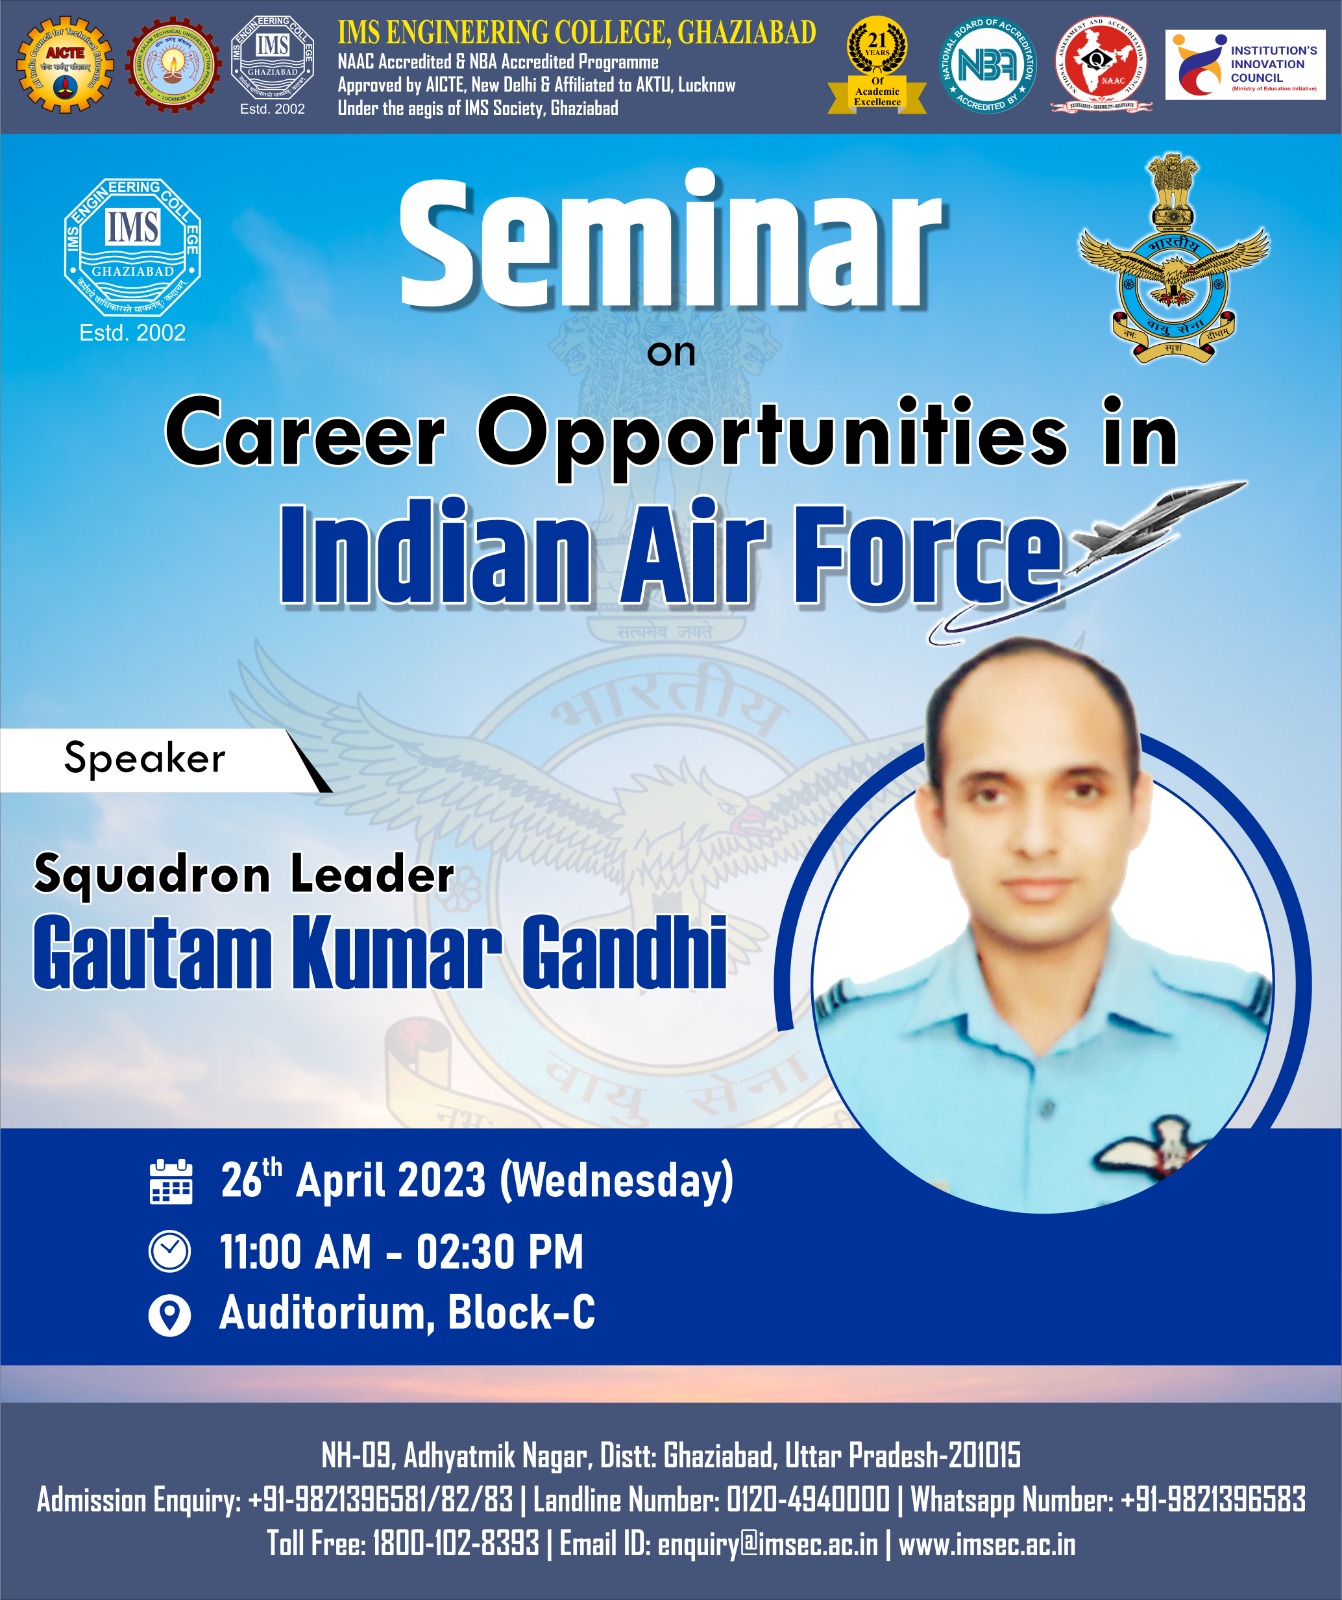 Seminar on Career Opportunities in Indian Air Force